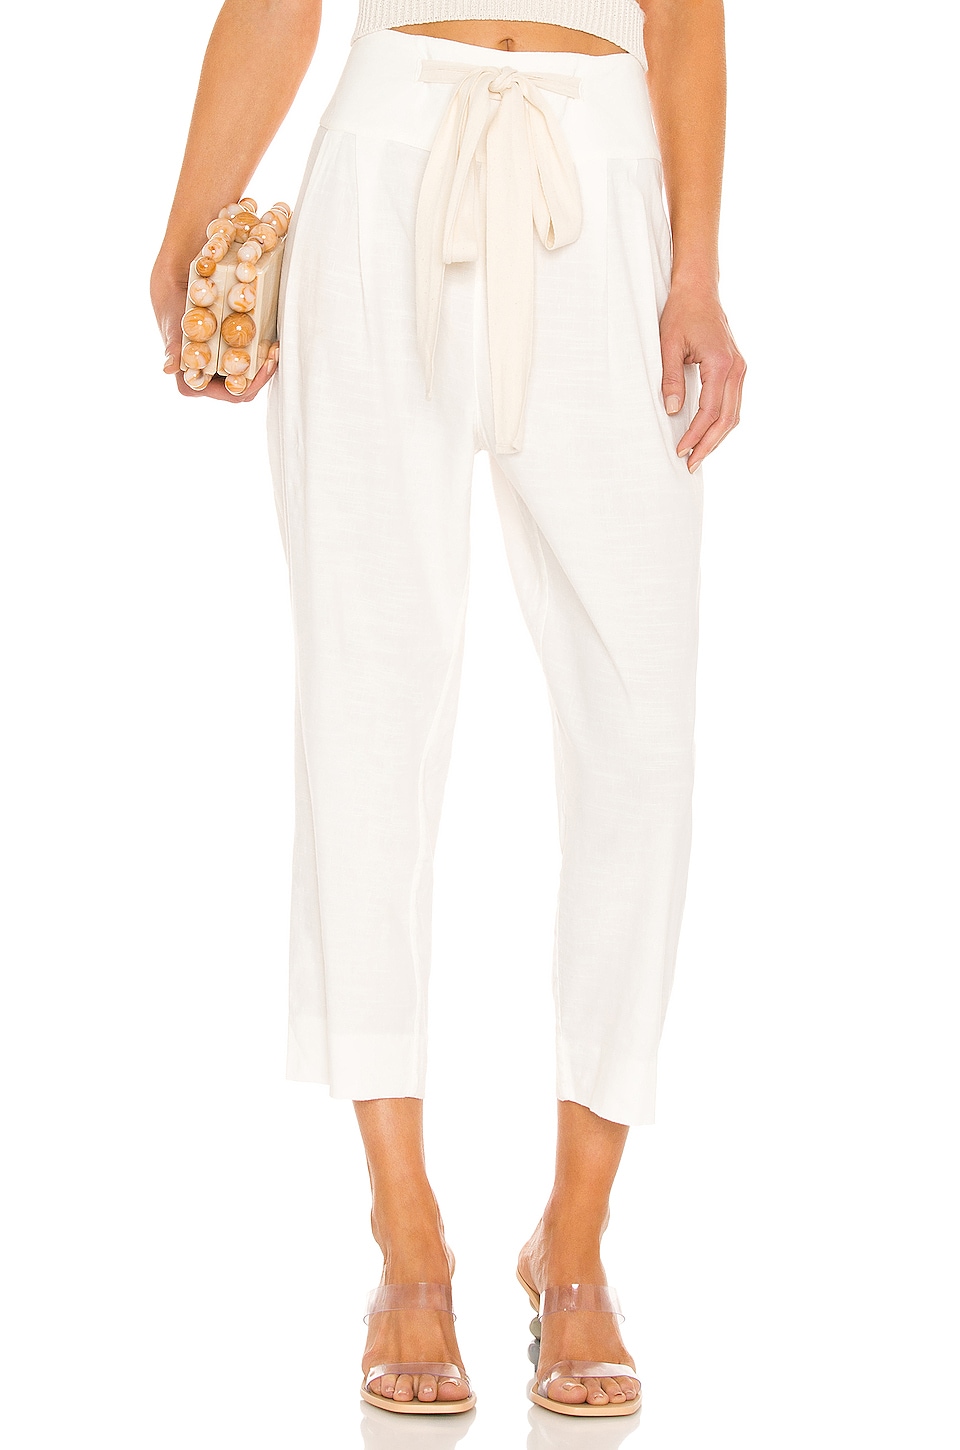 Cult Gaia Judith Pant in Off White | REVOLVE